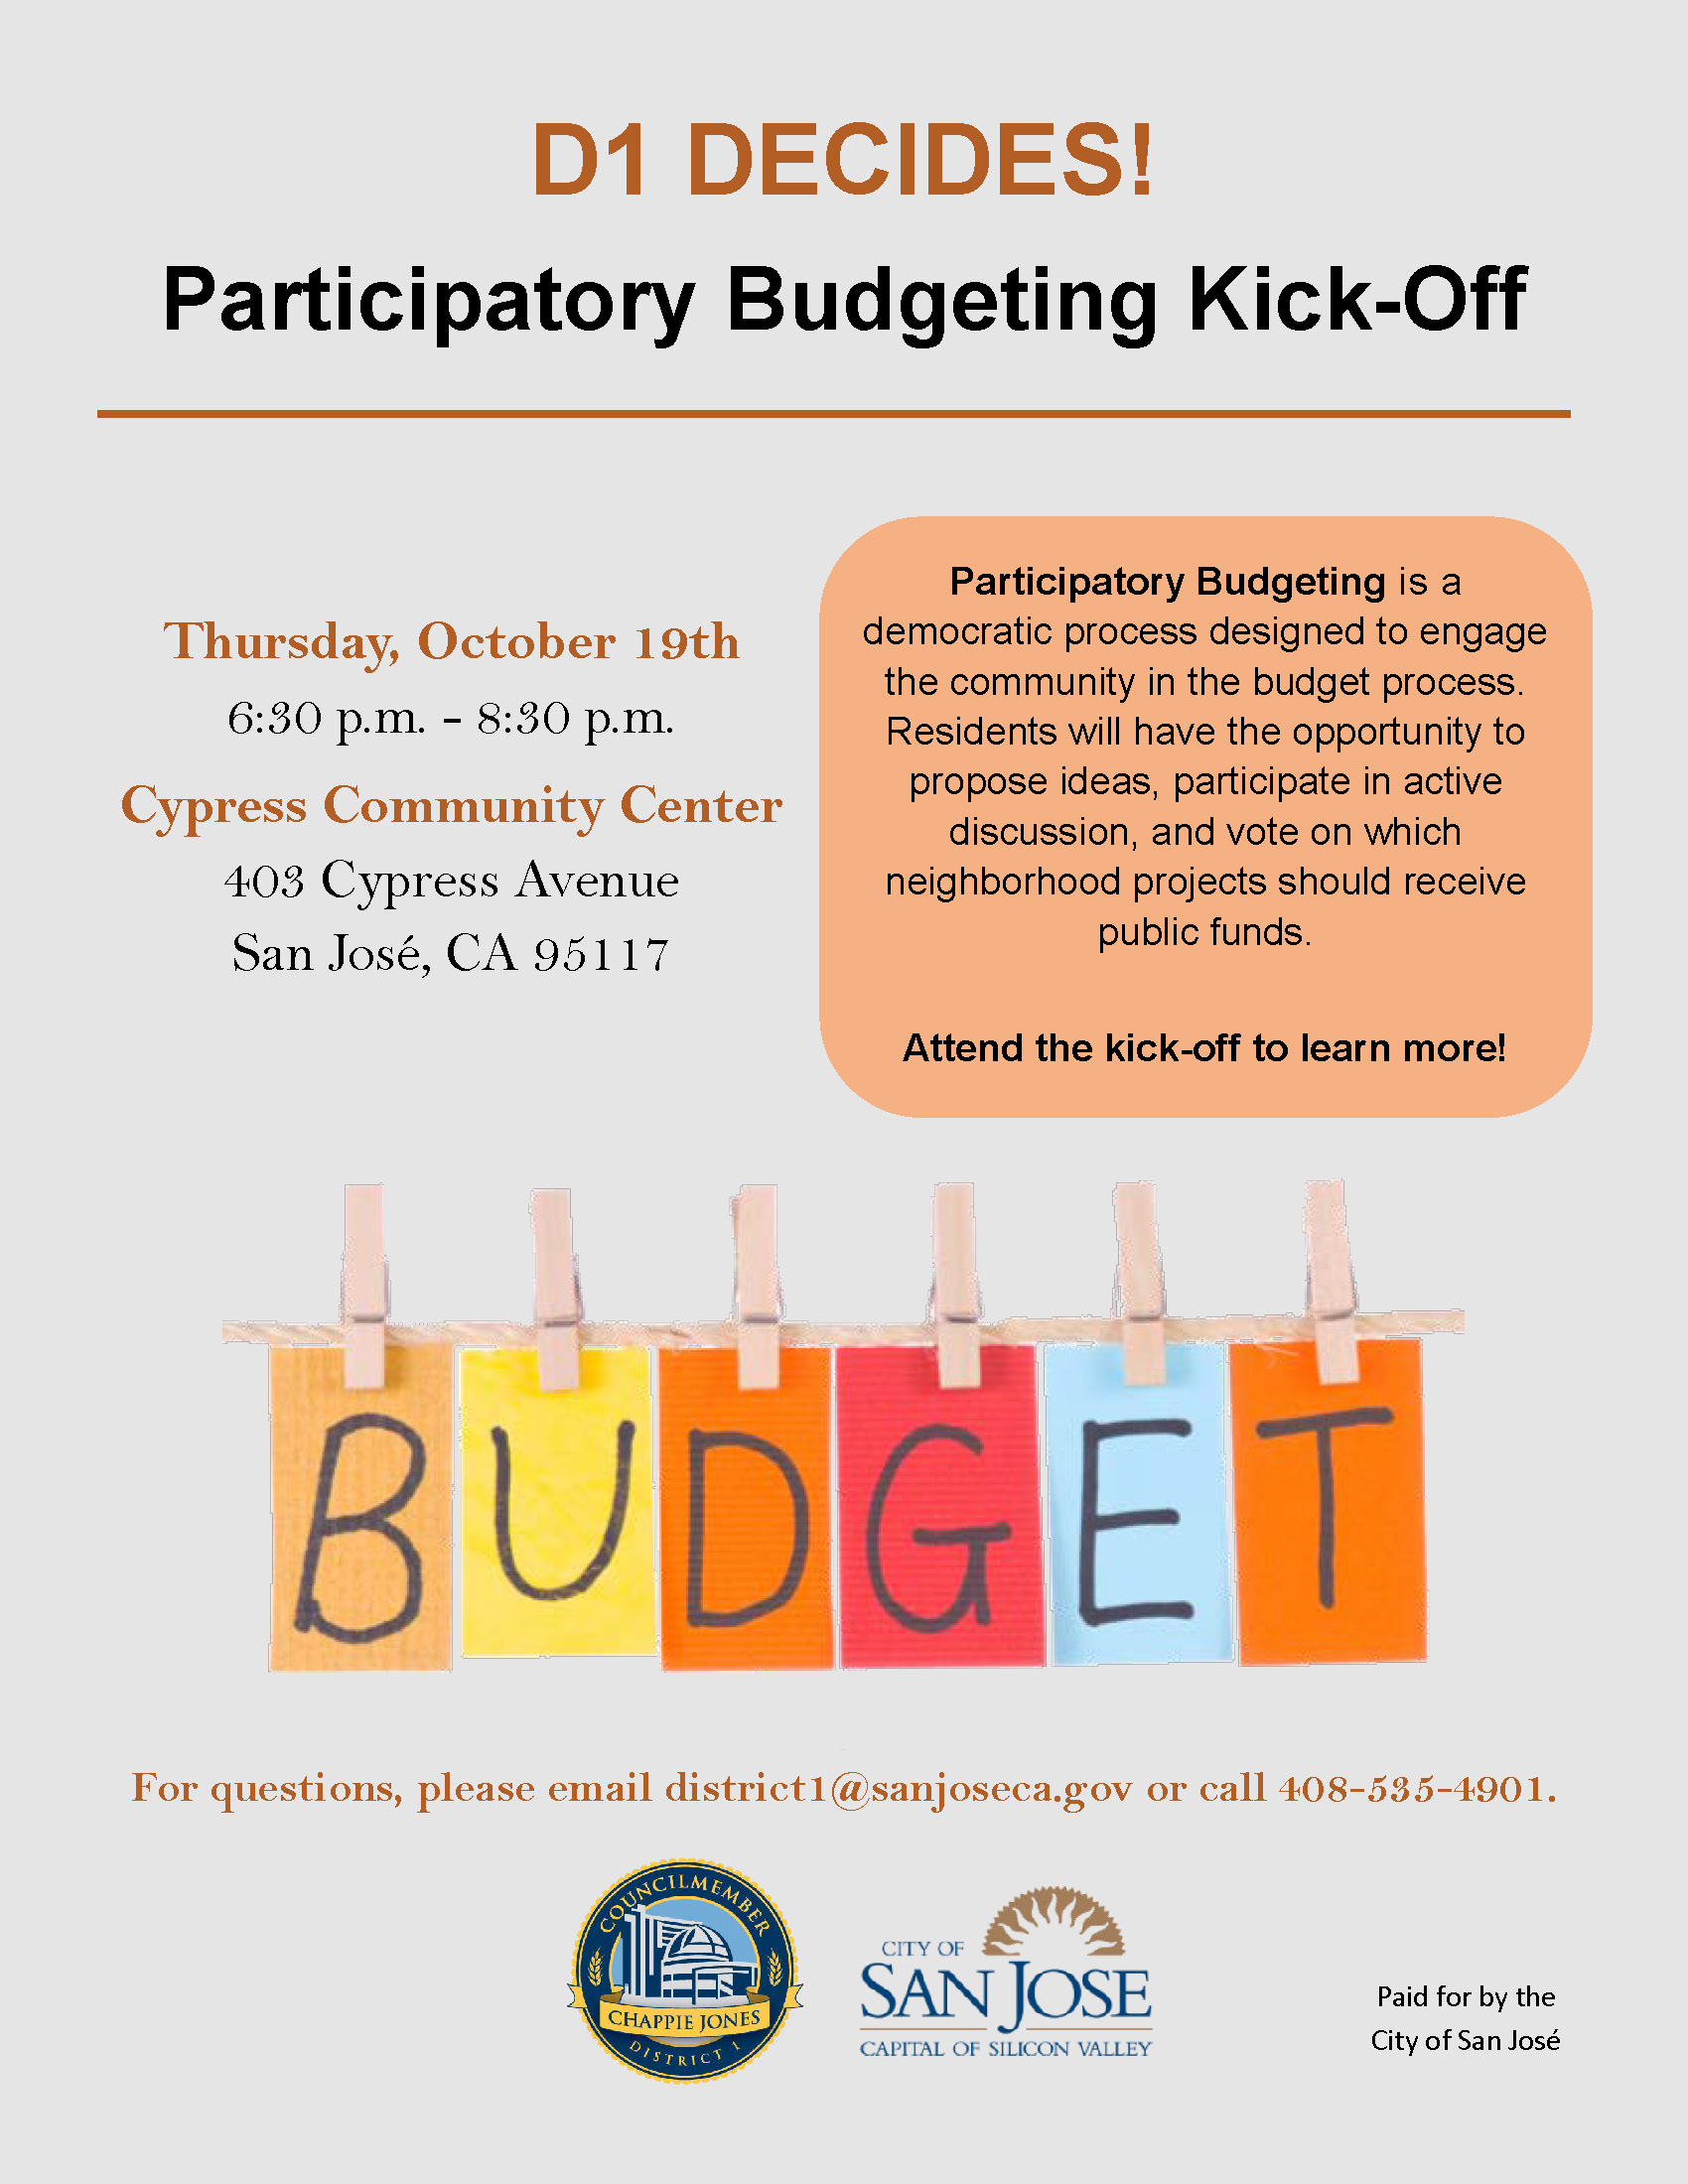 Flyer for the Participatory Budget kick-off meeting on October 19th at the Cypress Community Center.